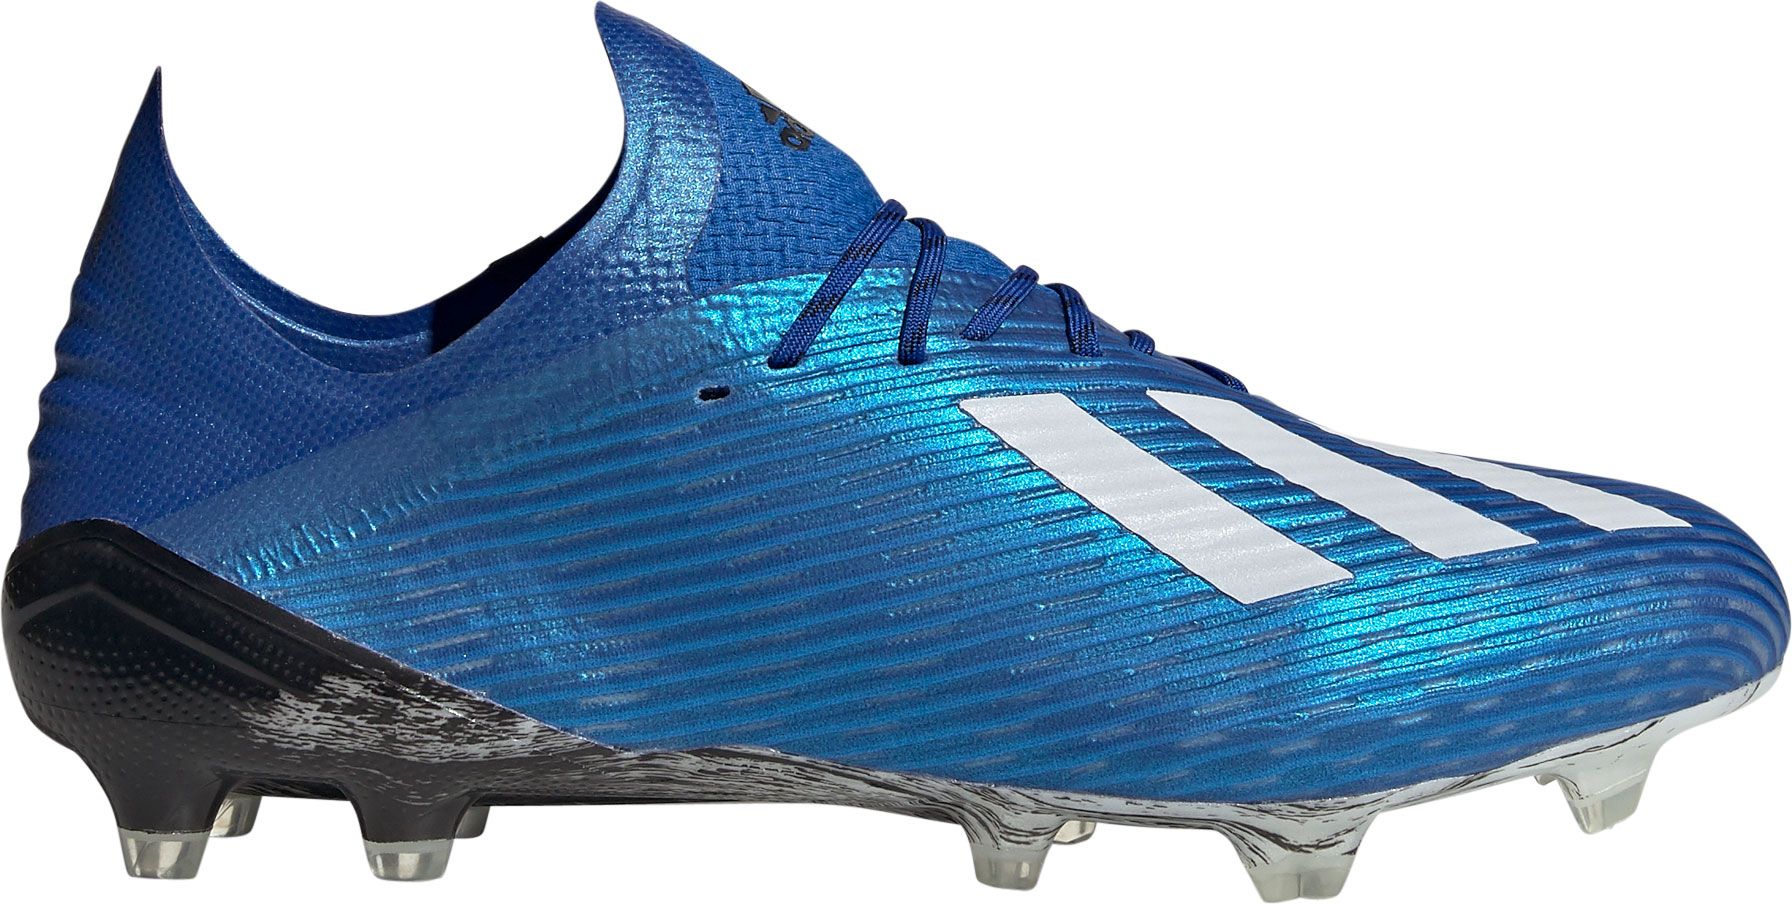 adidas 19.1 soccer cleats